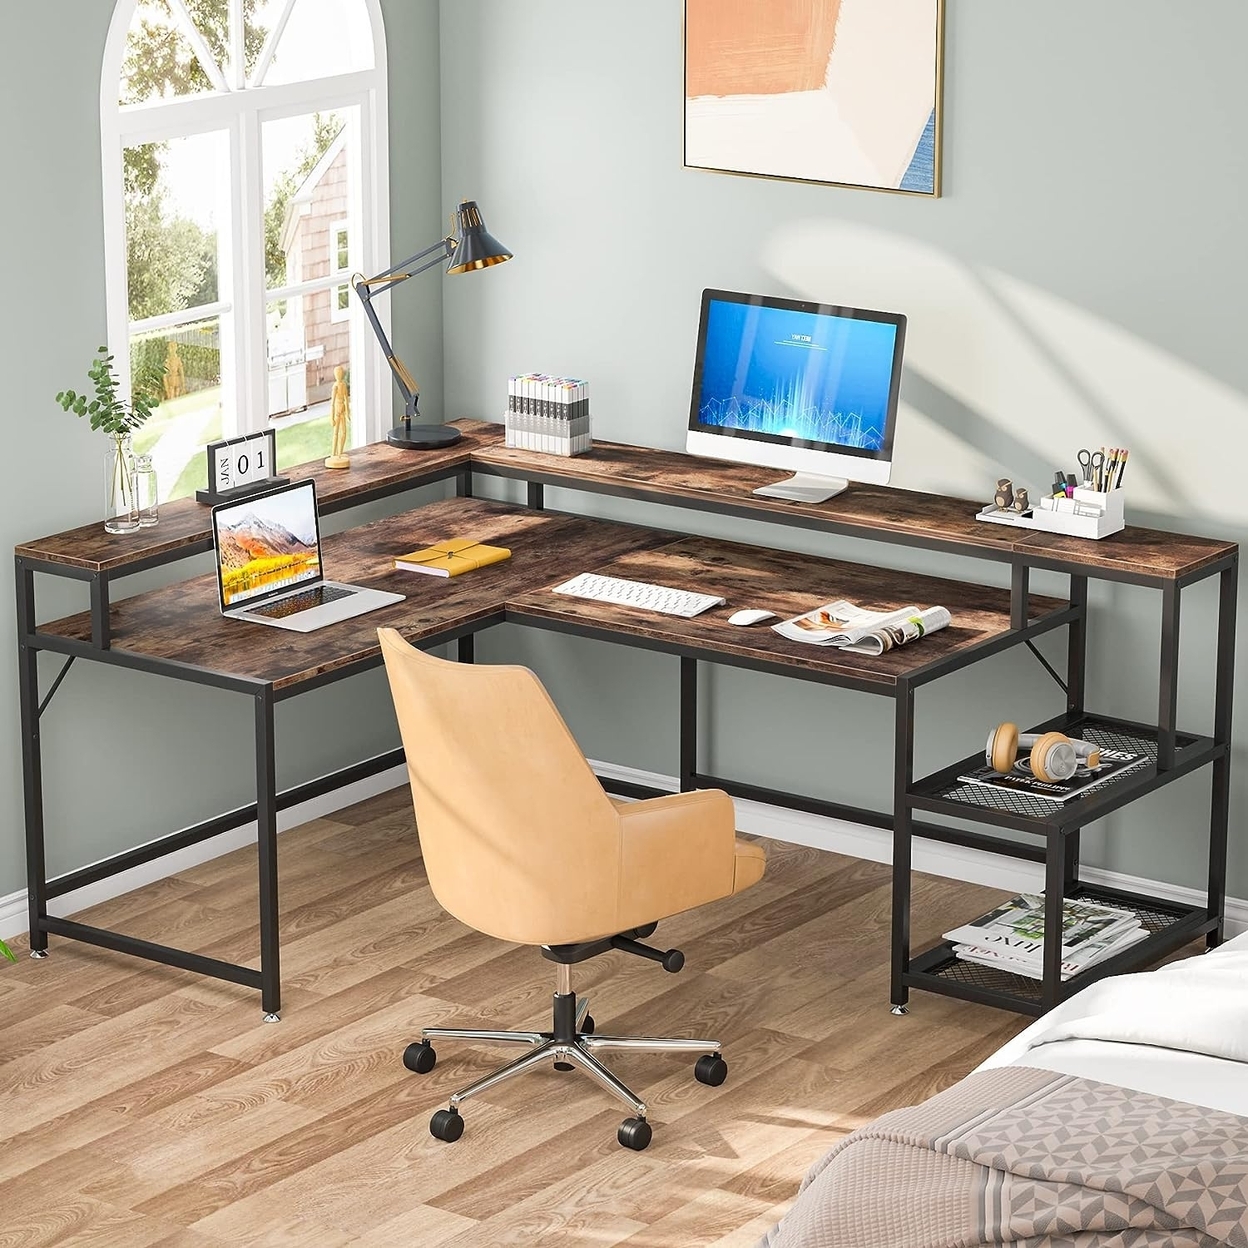 Tribesigns 69 Inch L Shaped Desk With Monitor Stand, Large Reversible Corner Desk With Storage Shelf - Rustic Brown